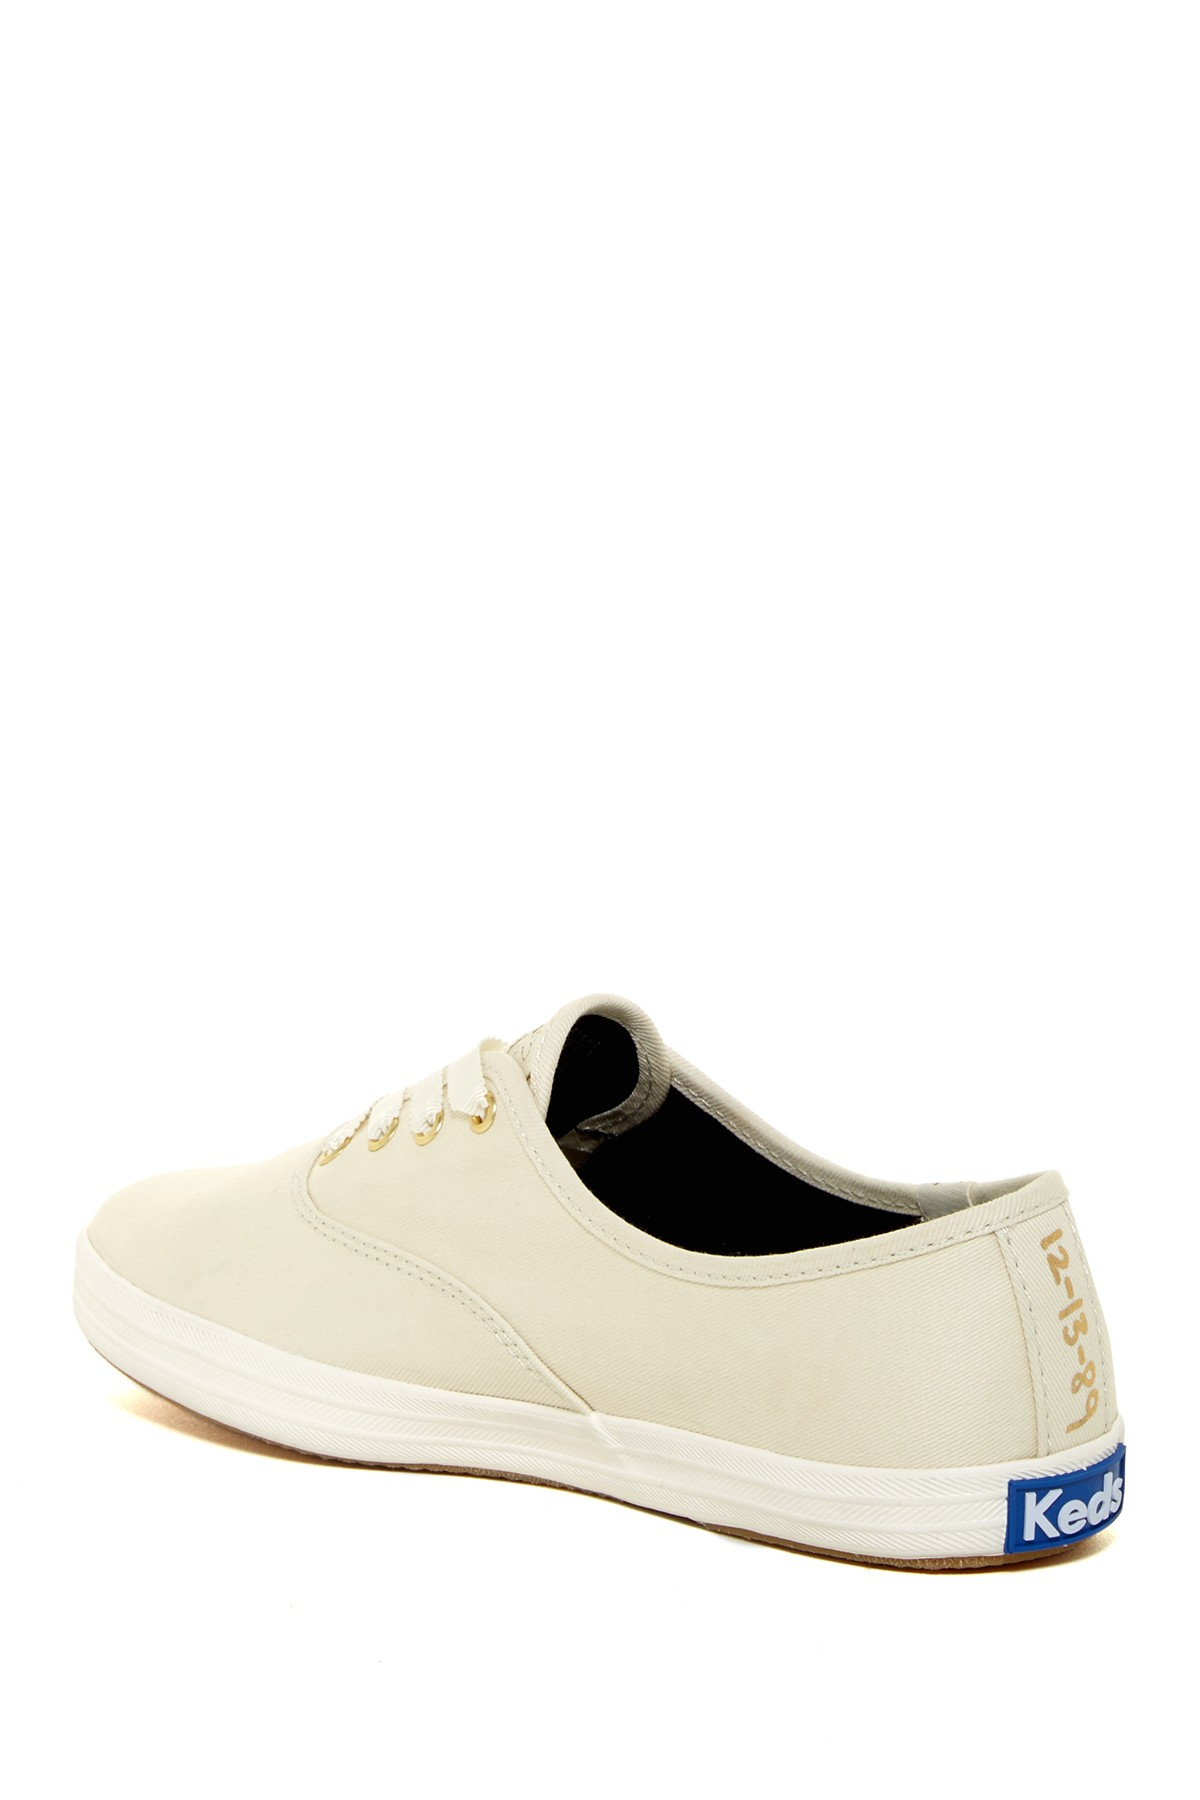 Keds Taylor Swift Champion Sneaky Cat Sneaker in Cream (Natural) - Lyst